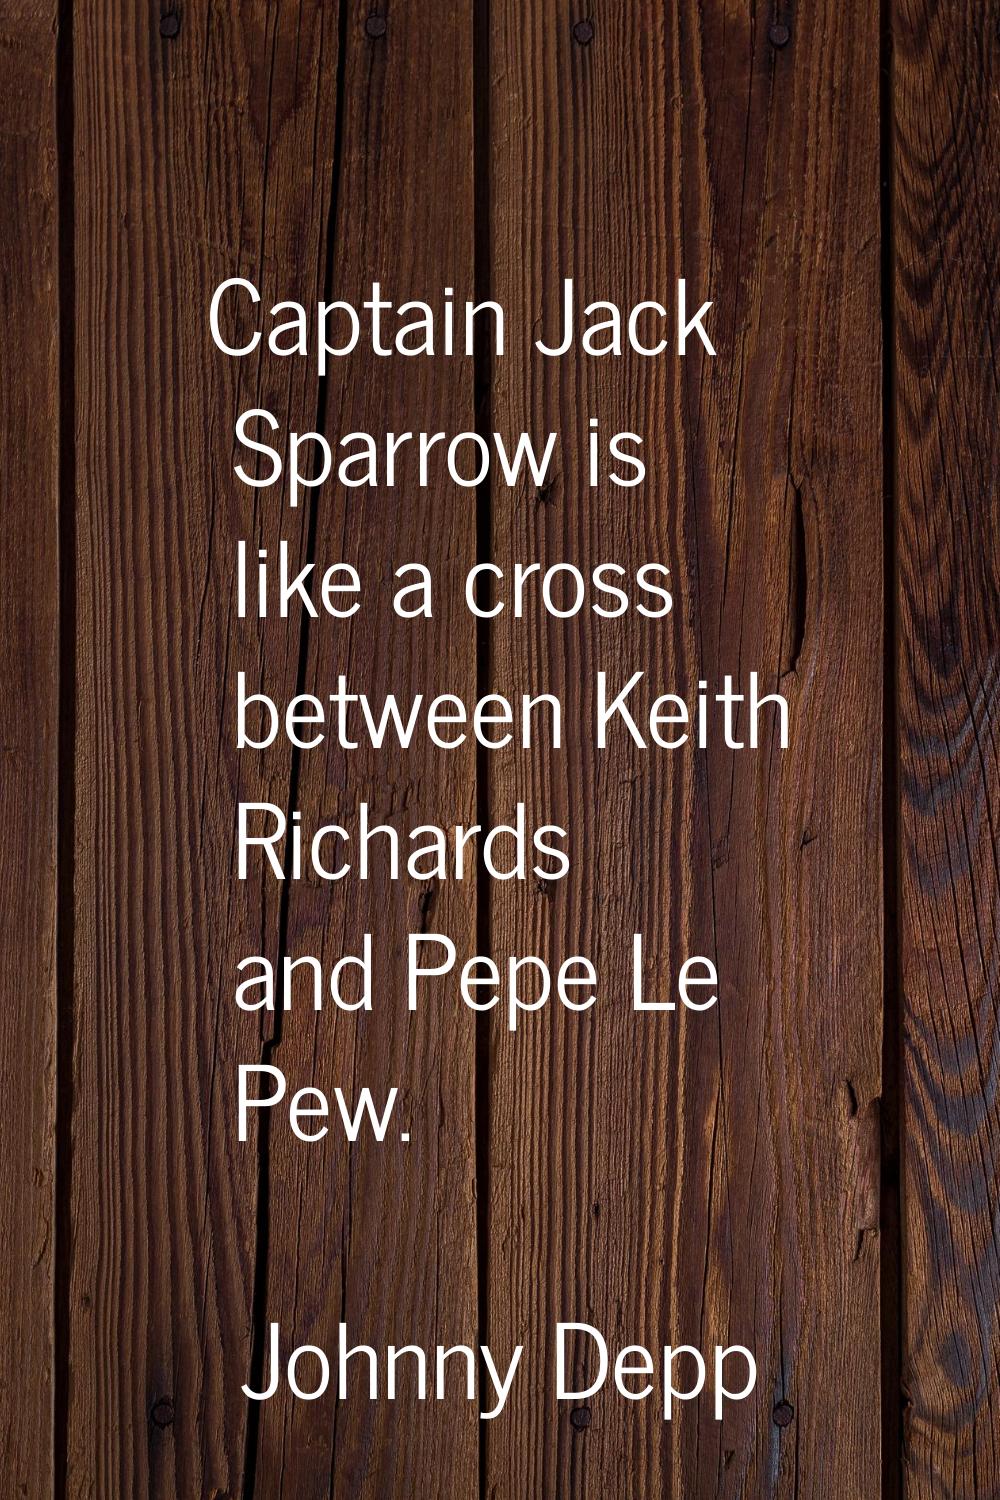 Captain Jack Sparrow is like a cross between Keith Richards and Pepe Le Pew.